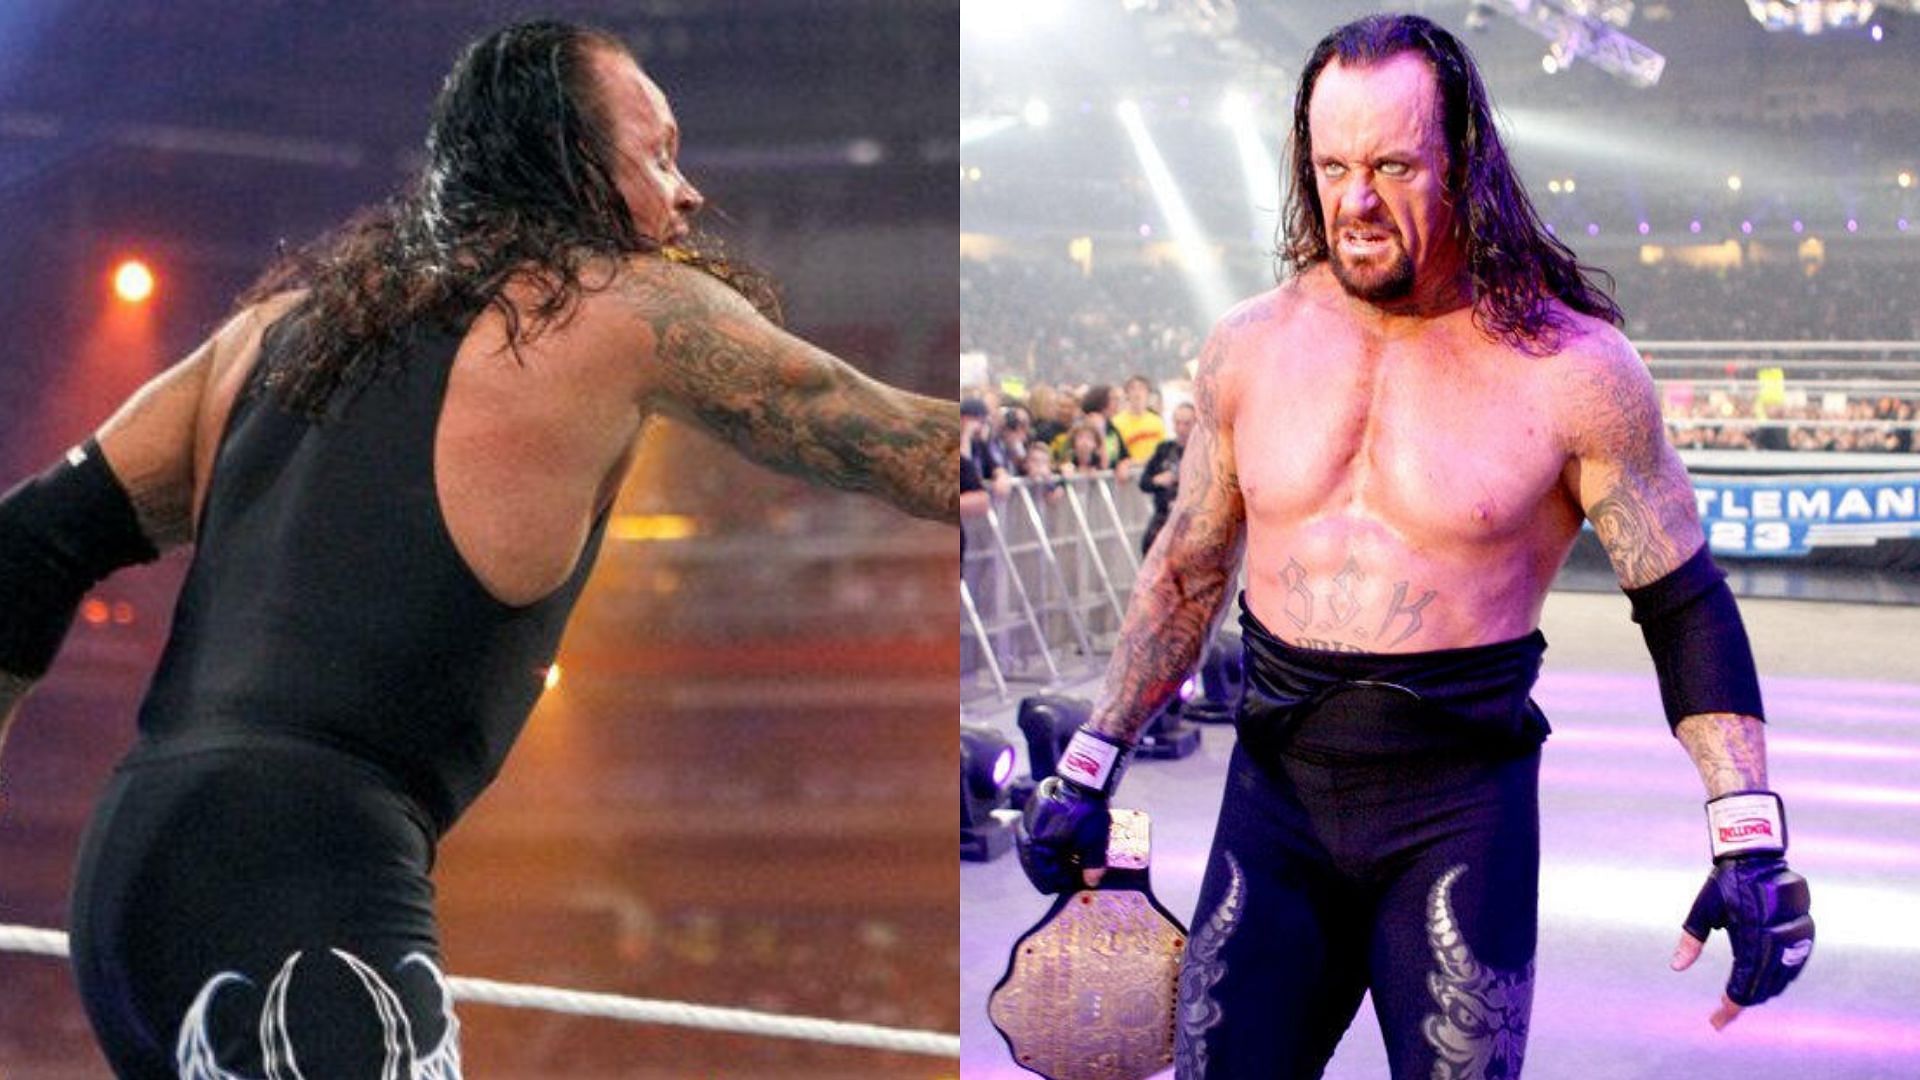 The Undertaker is a legend of the wrestling business